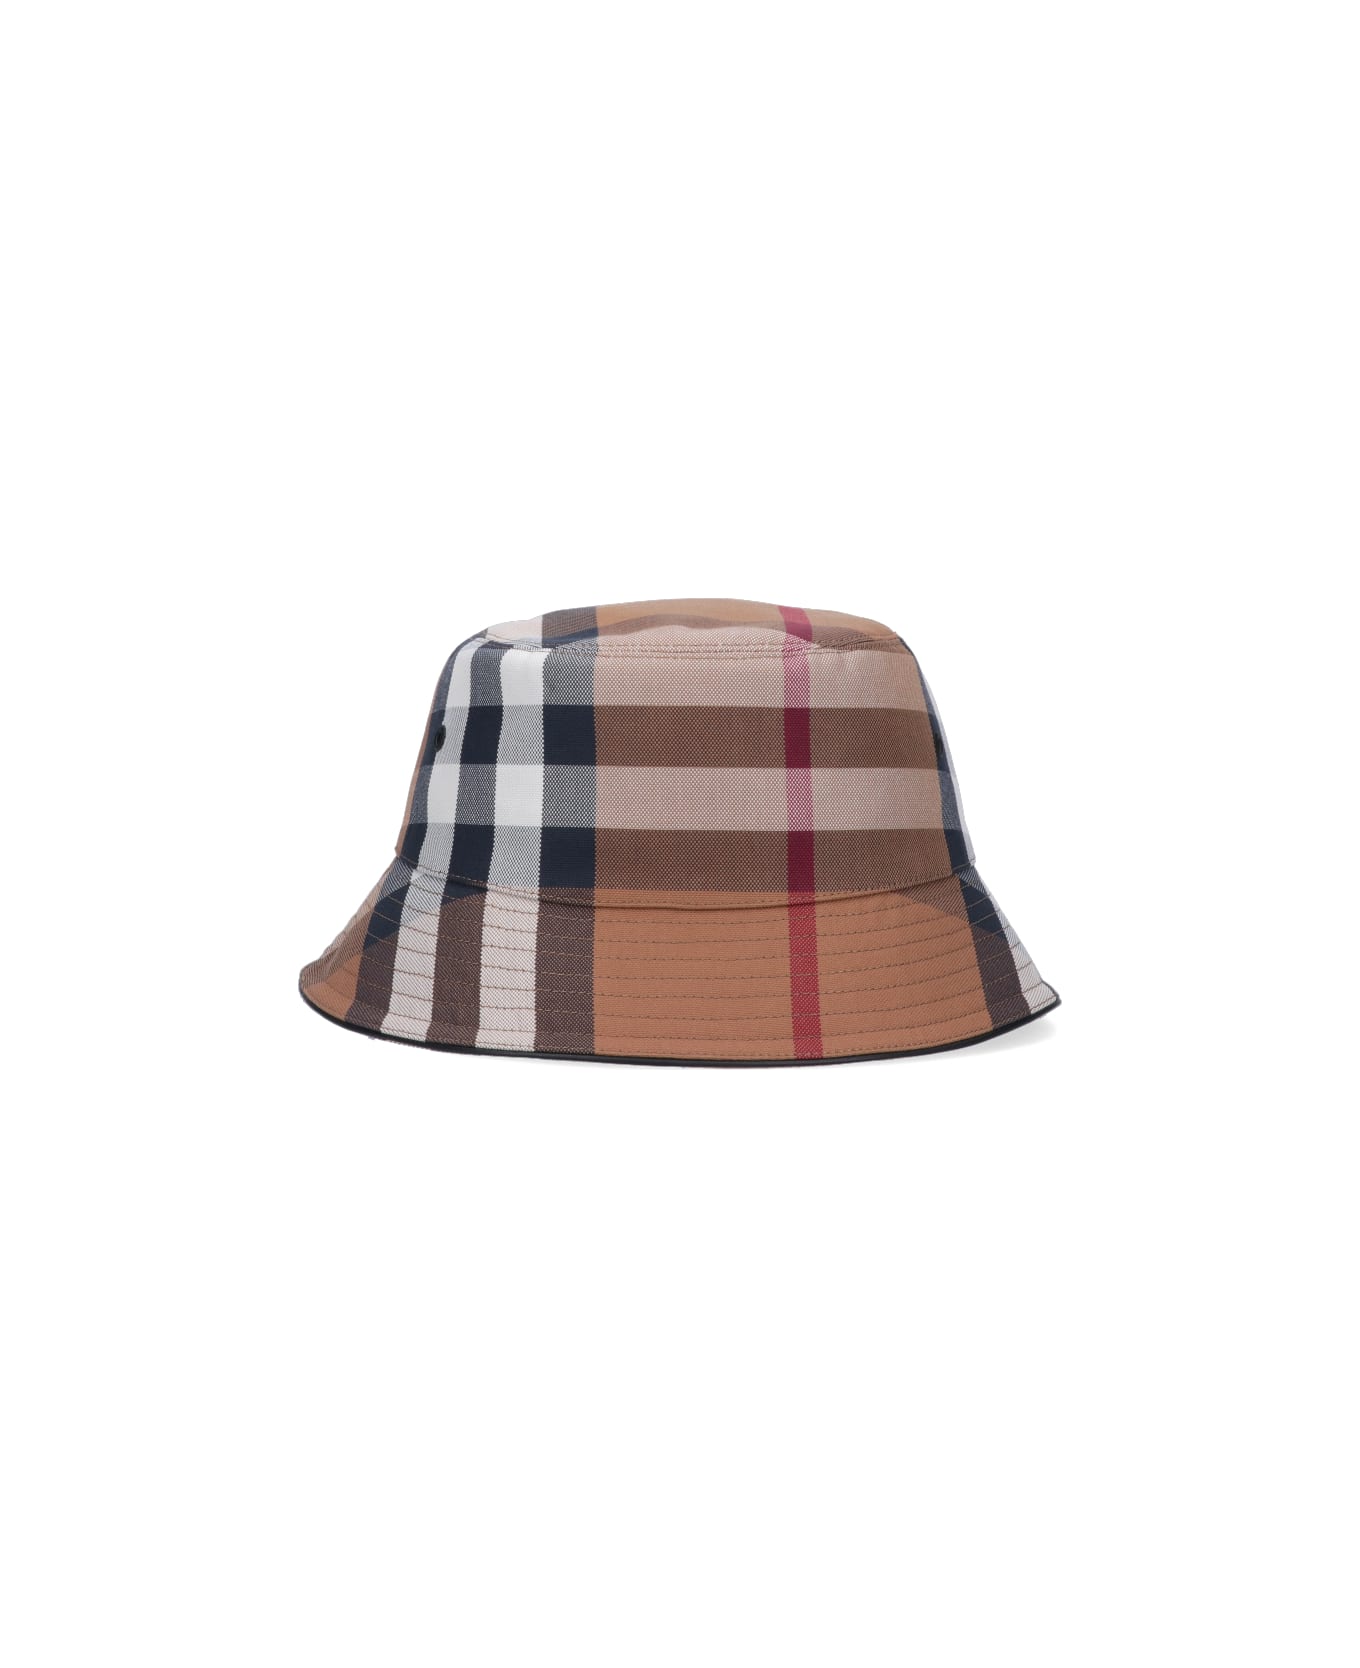 Burberry Hat - Brown